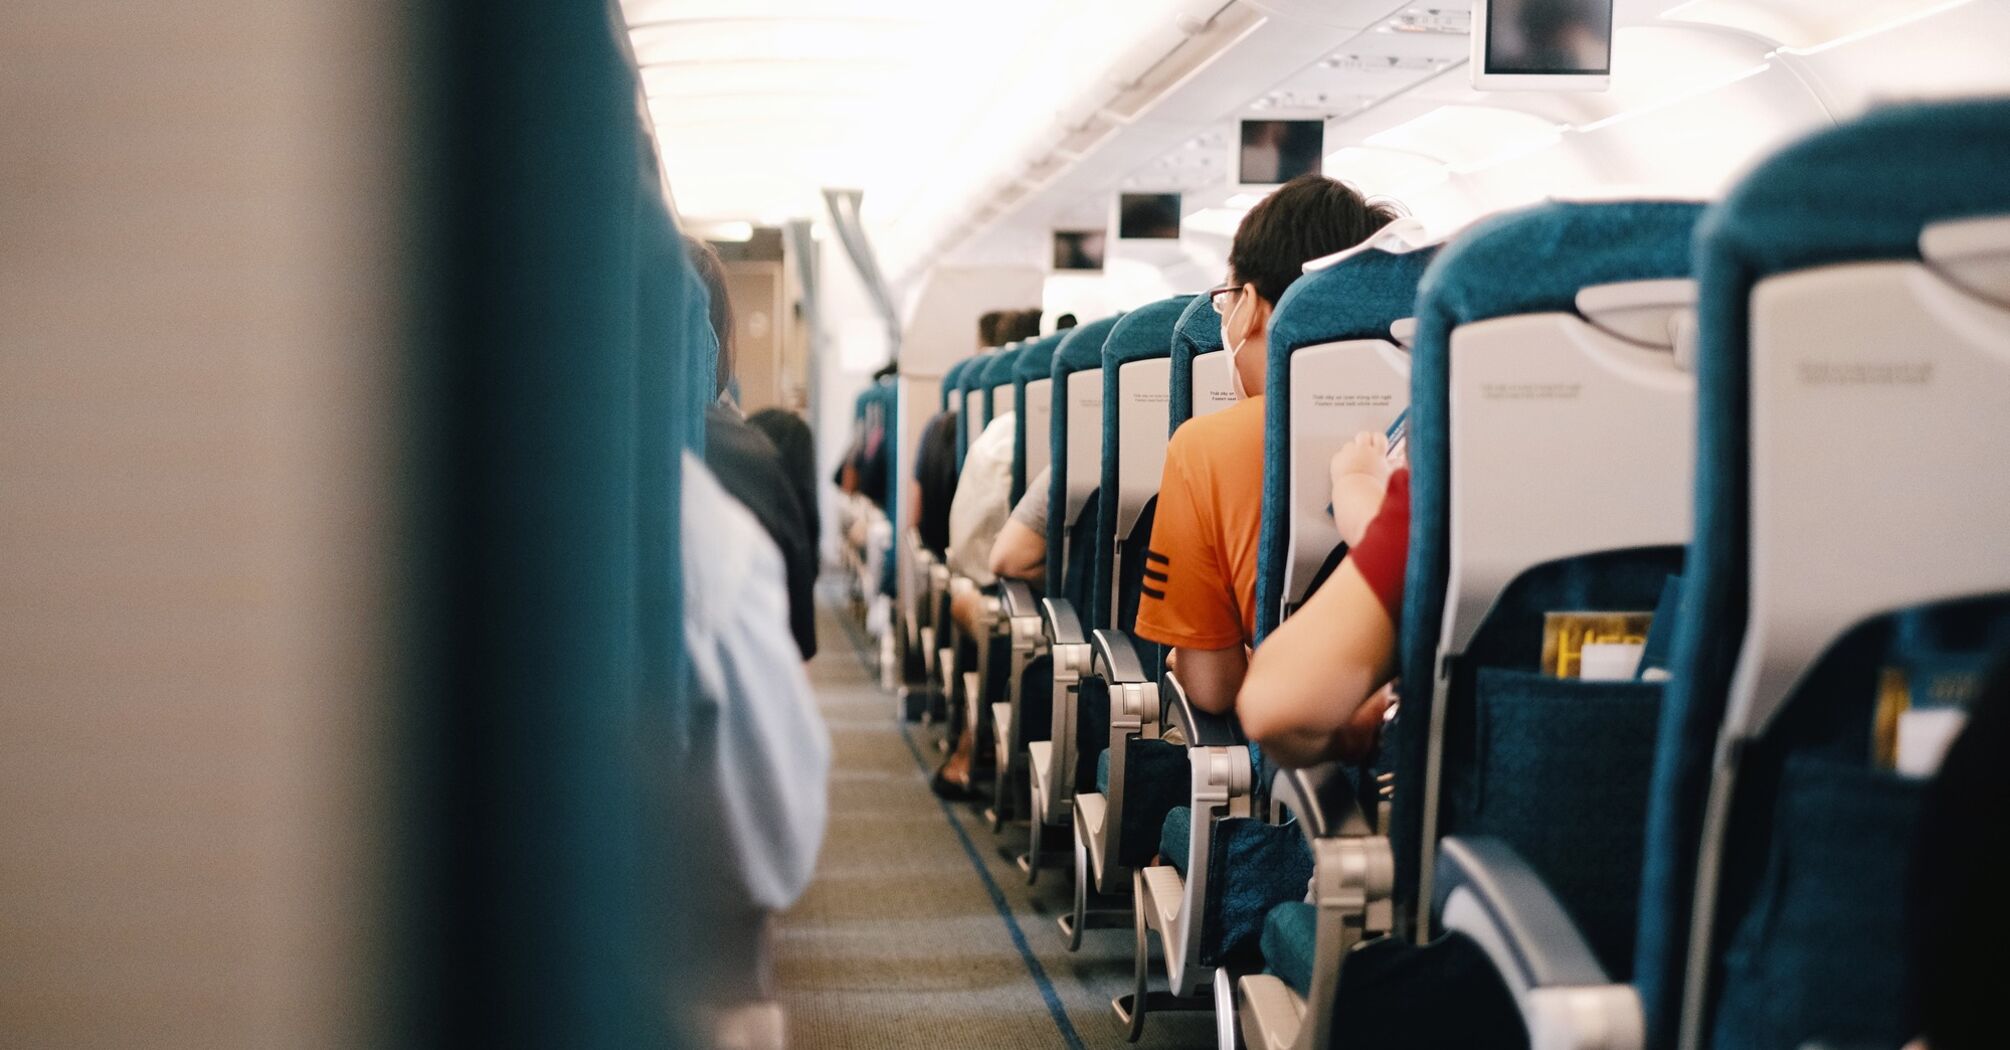 An etiquette expert gave advice to passengers on how to make the journey enjoyable for everyone in the airplane